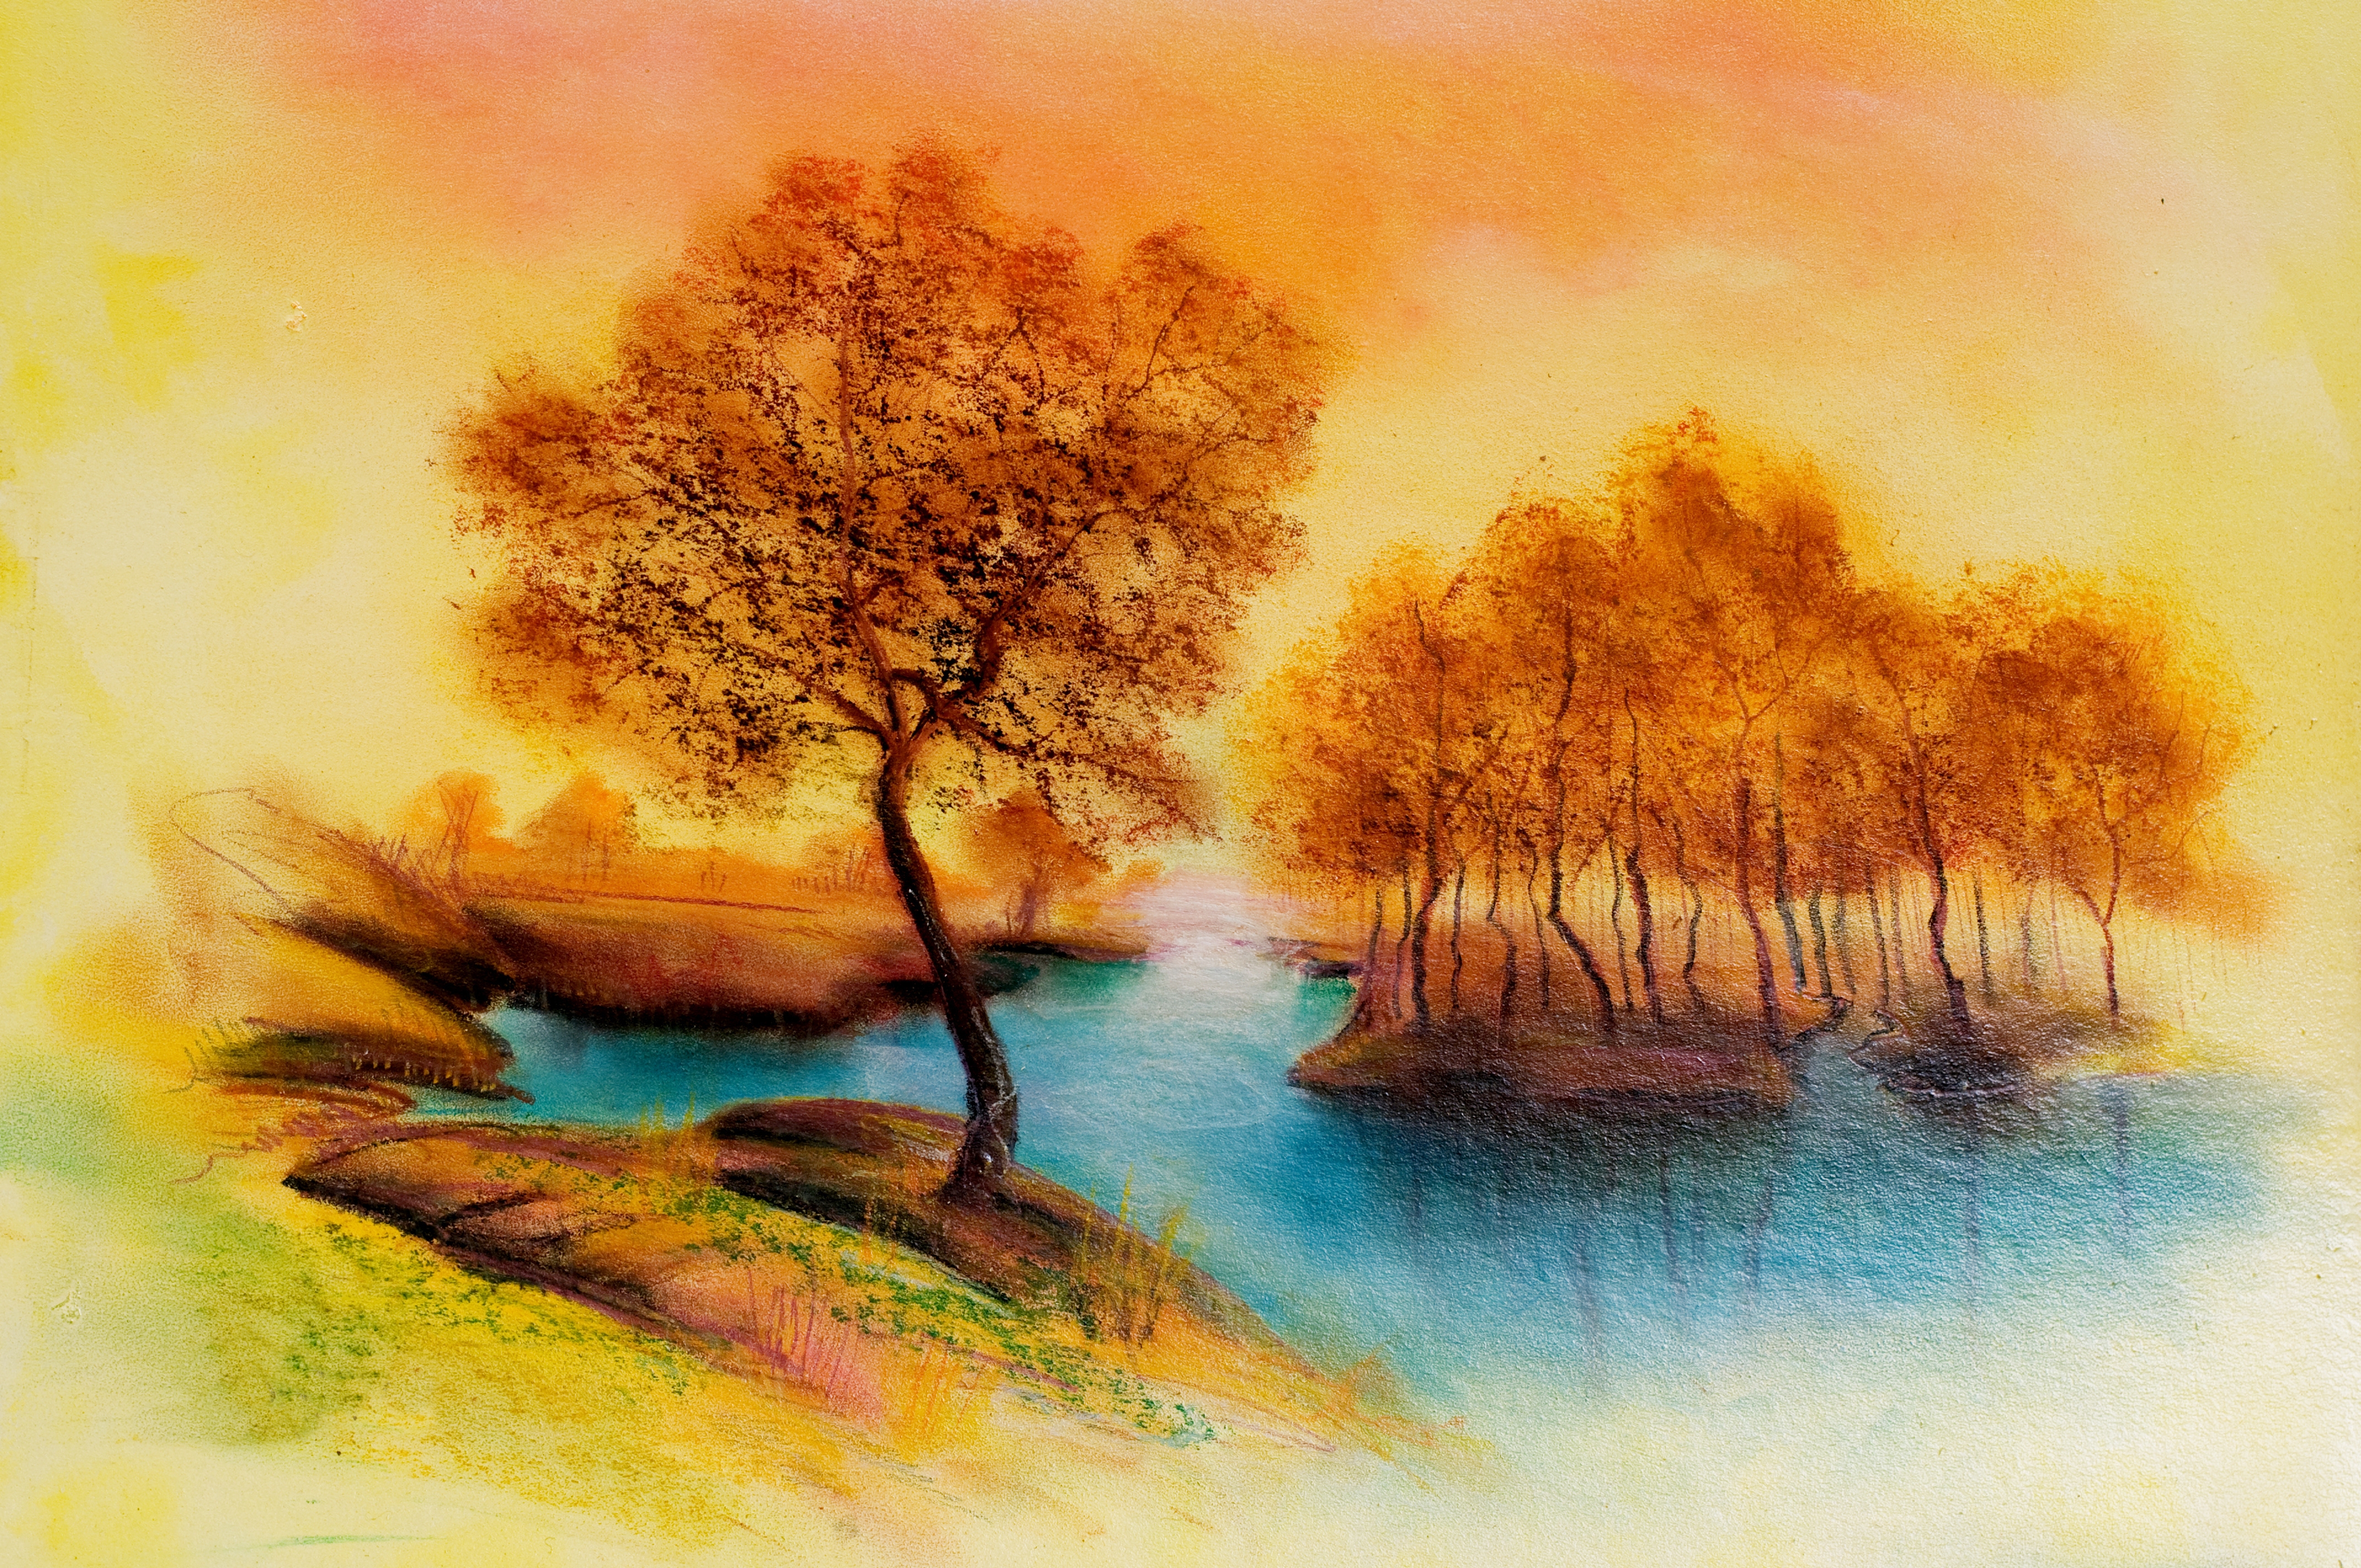 River and Trees Landscape In Autumn Paint Wallpaper